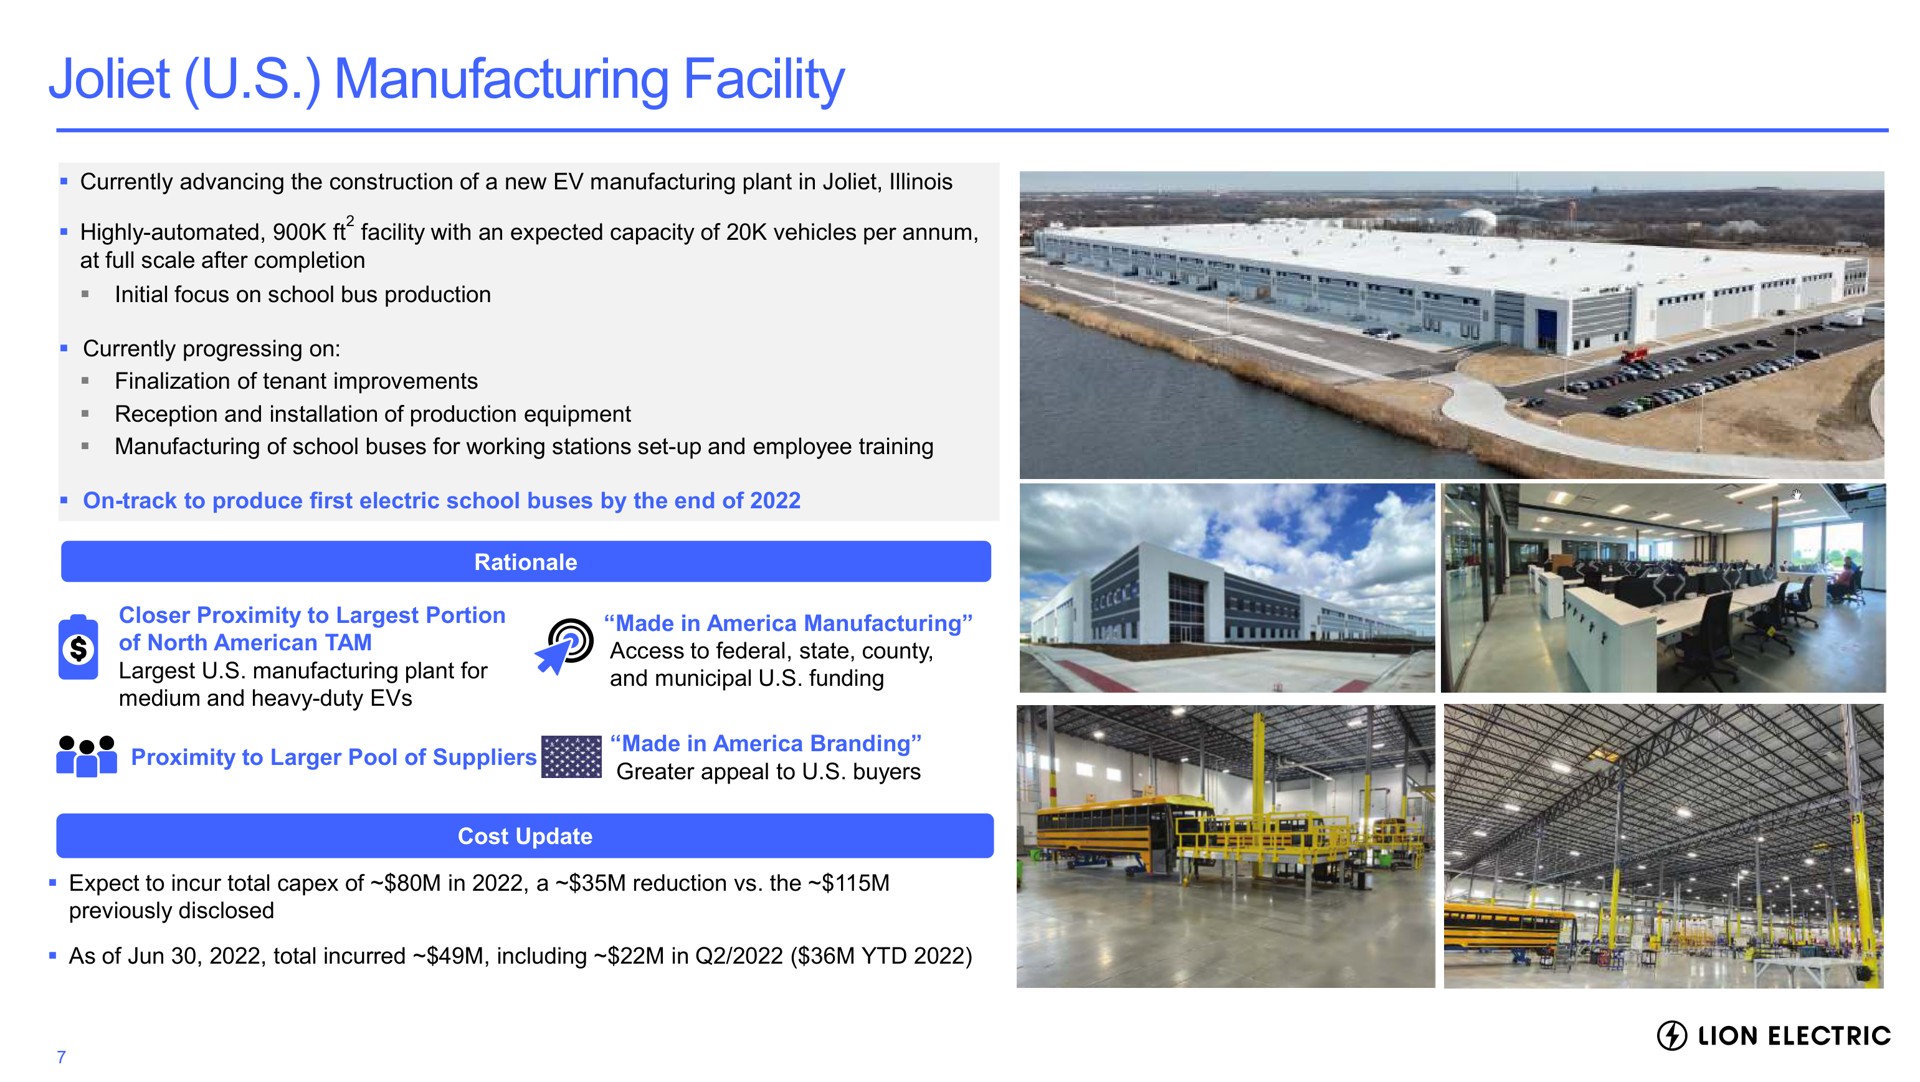 manufacturing facility access to federal state county of north tam lion electric | Lion Electric